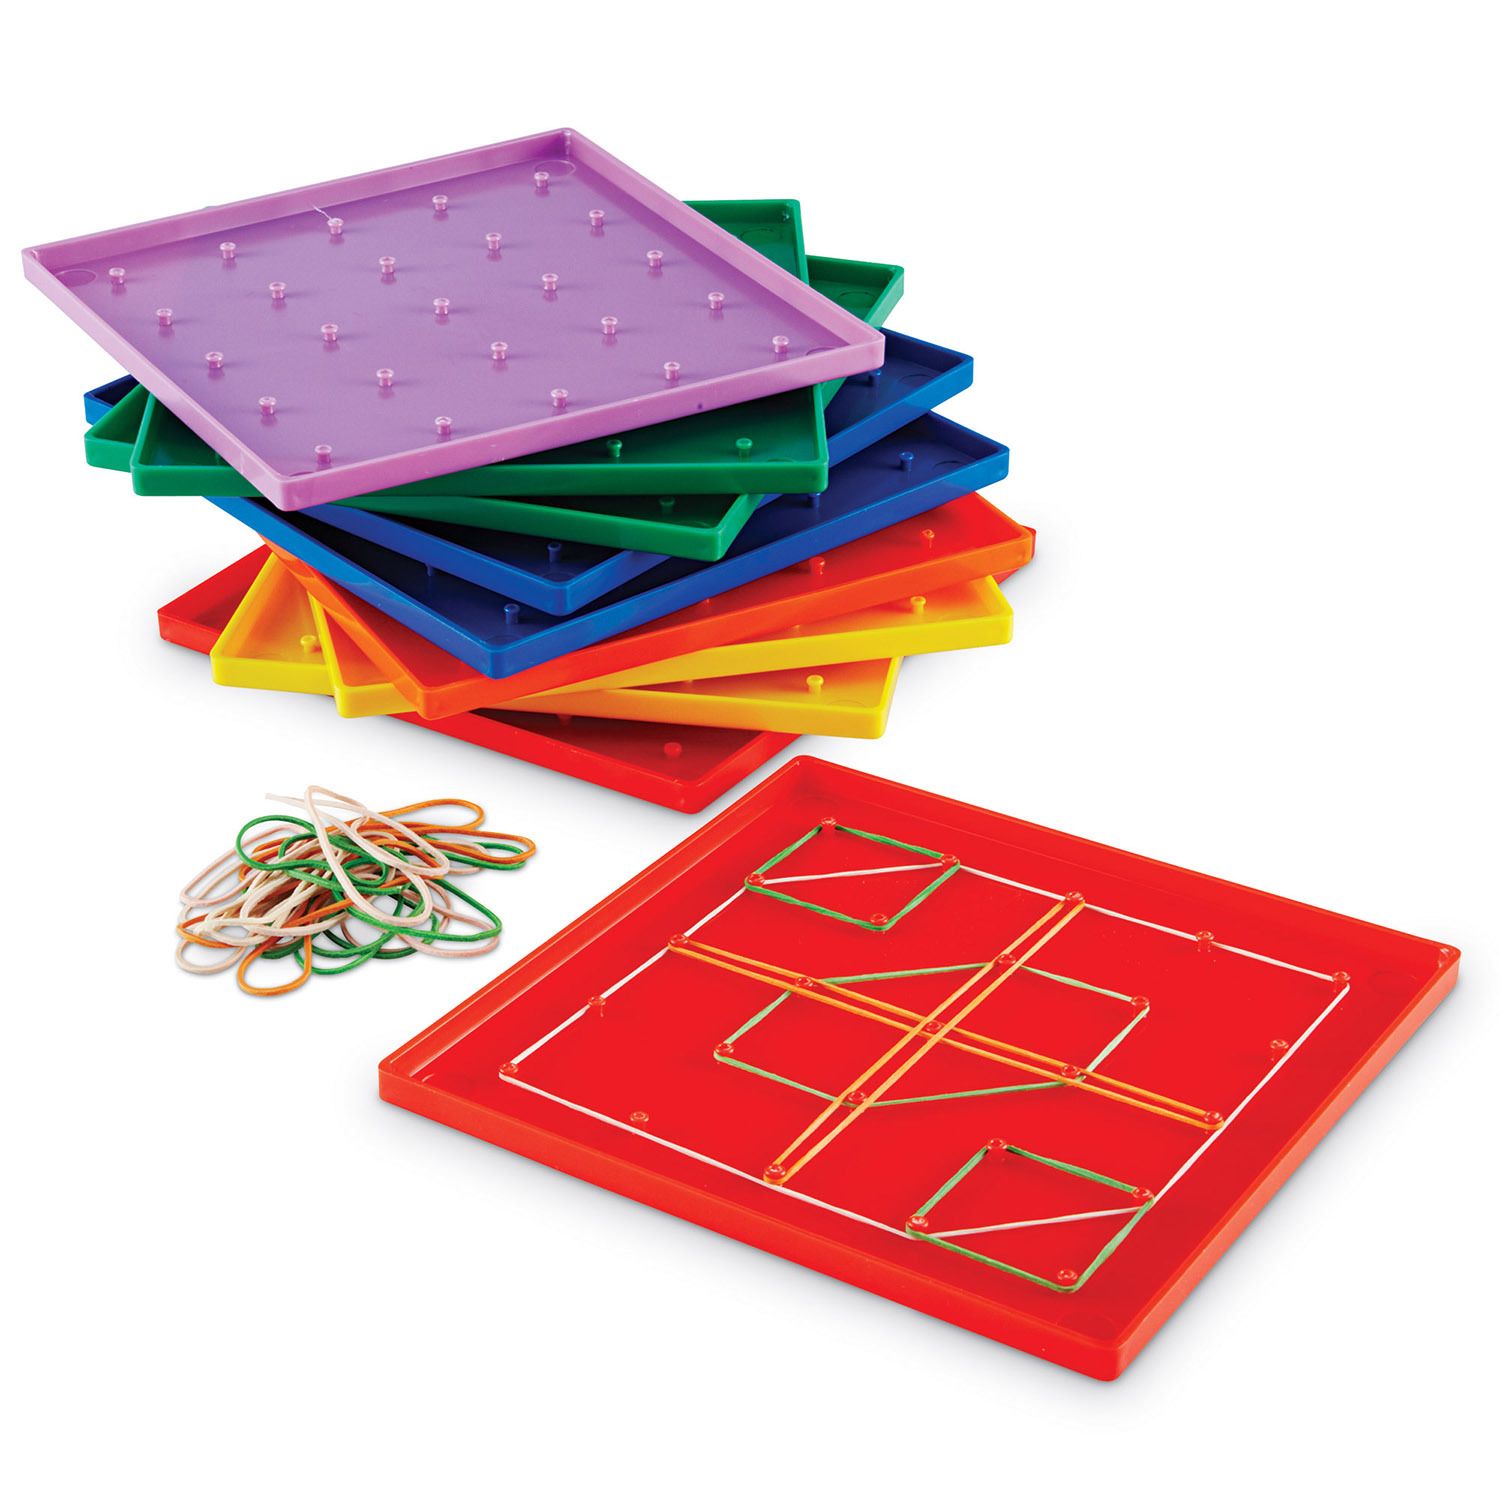 Image for Learning Resources 7¼" Assorted Geoboards, Set of 10 at Kohl's.